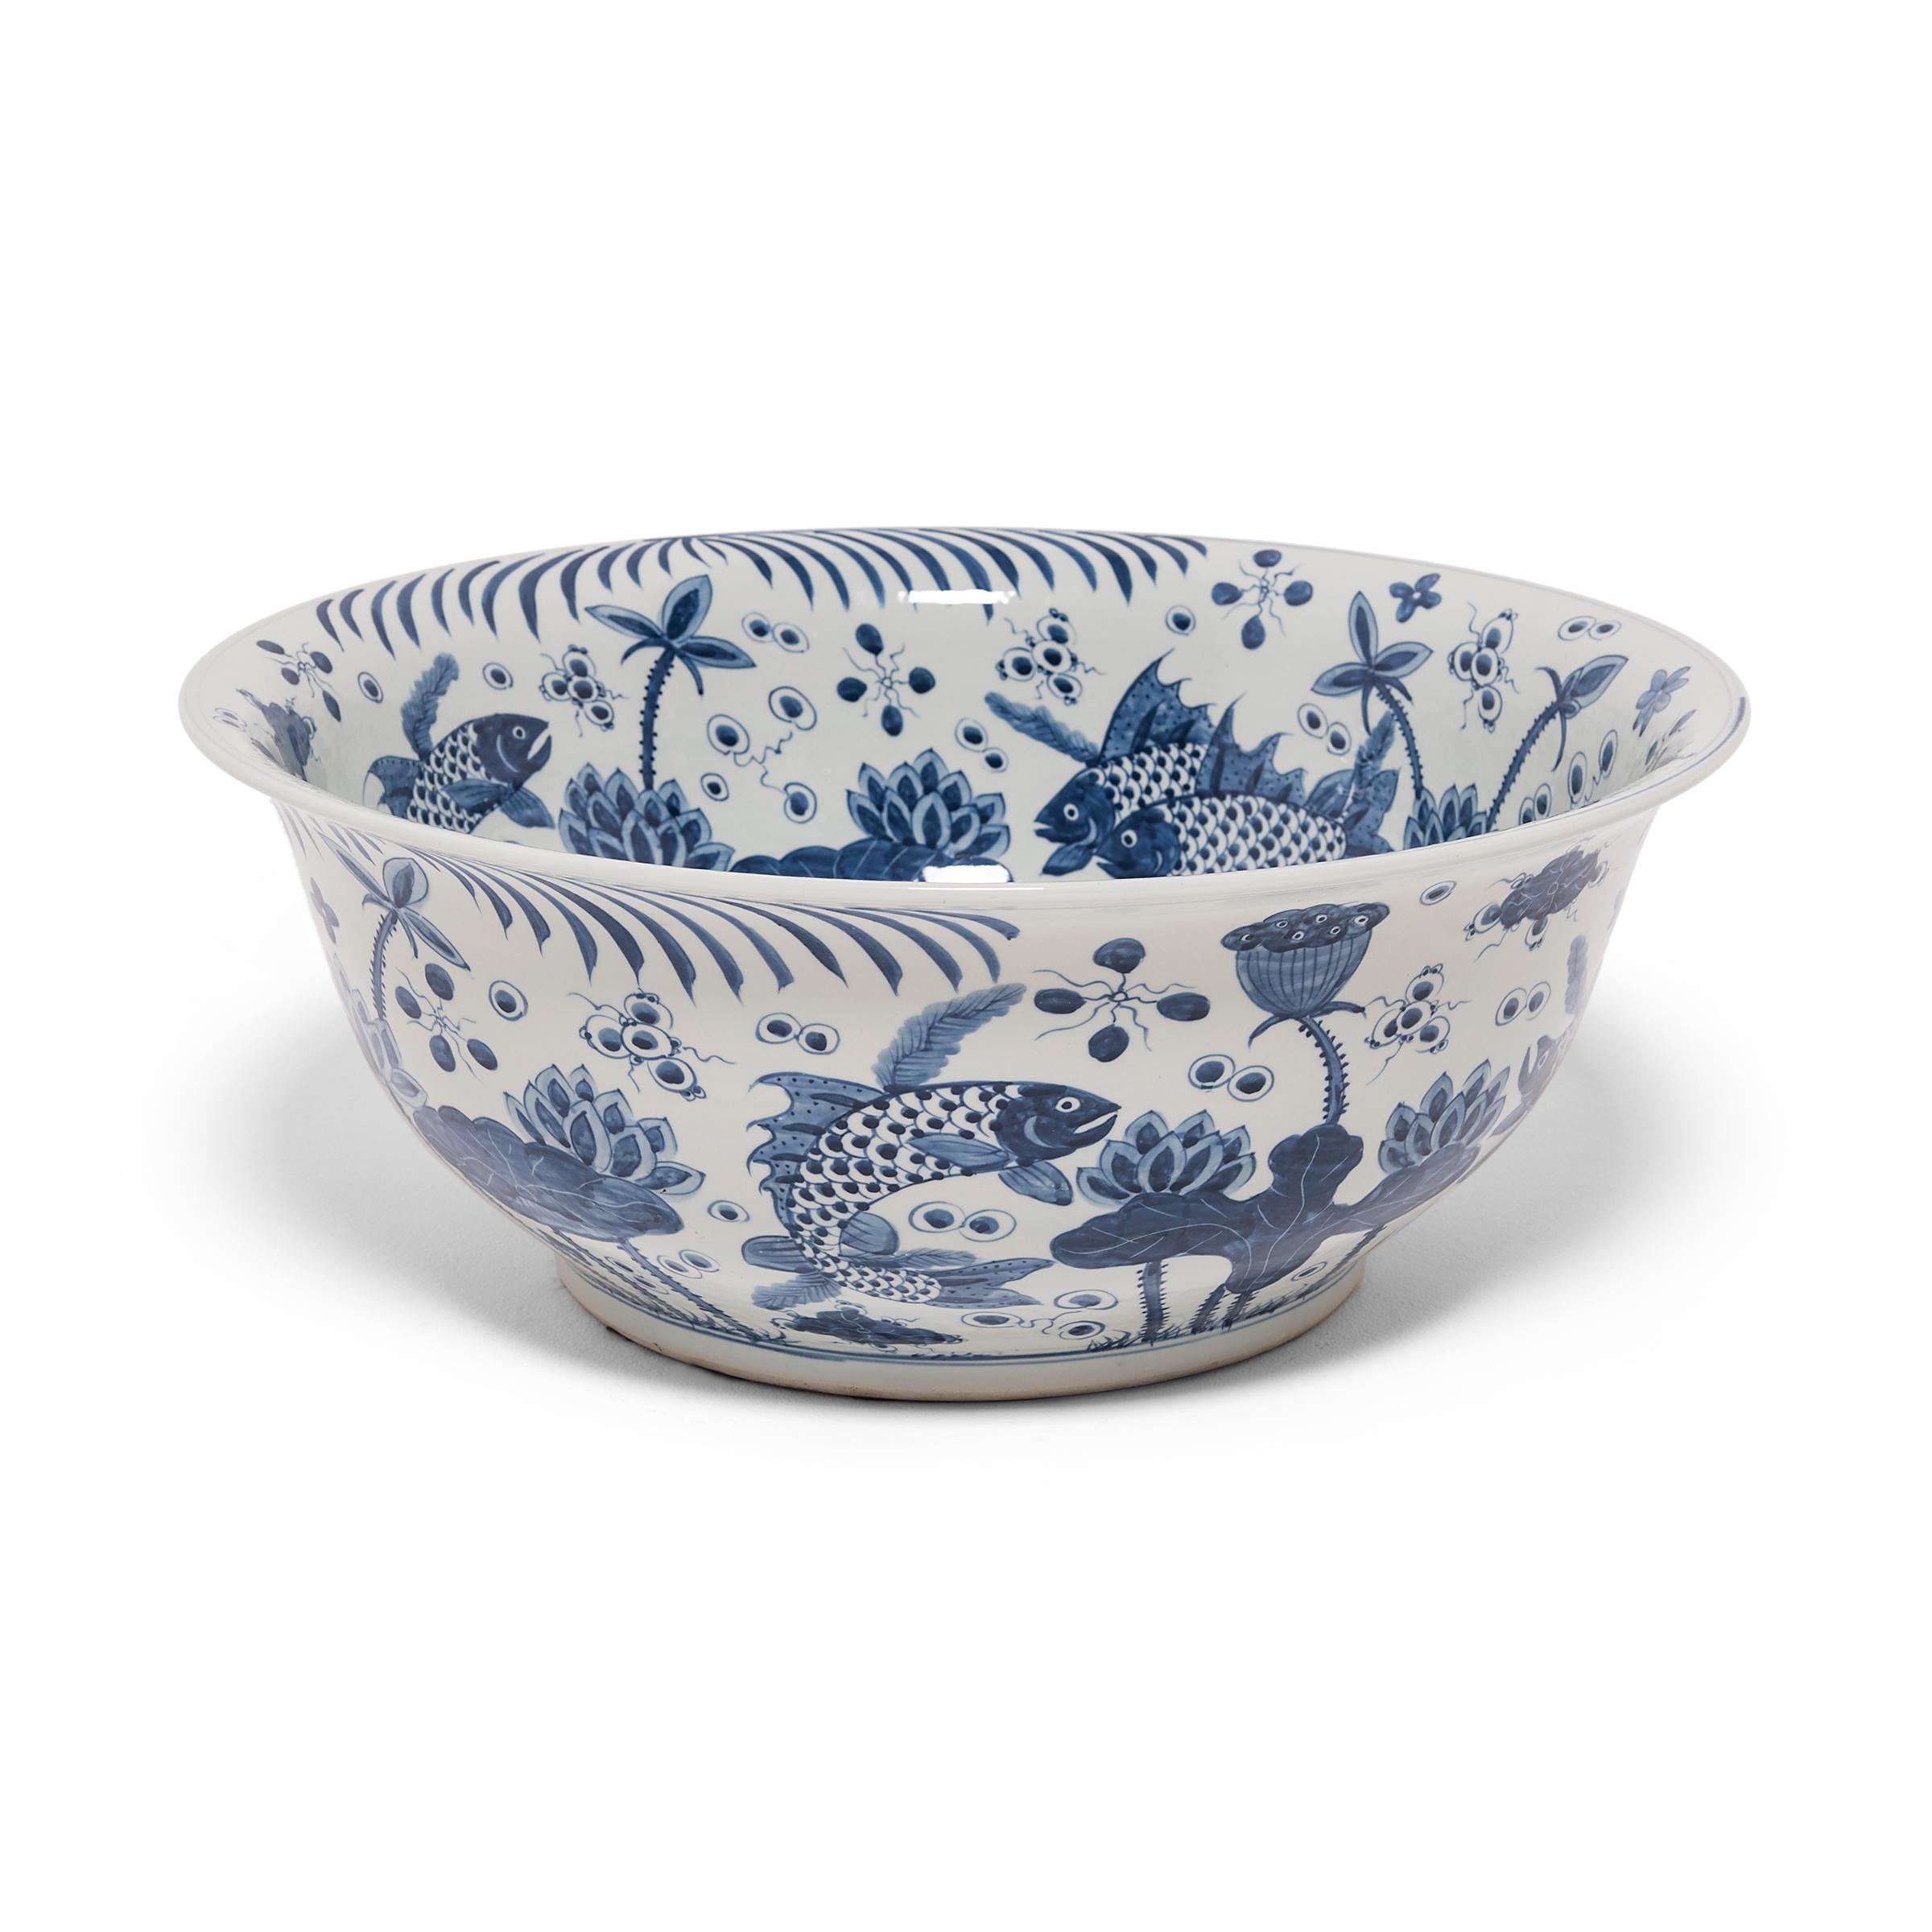 Beautifully rendered with expressive brushwork, the painted decoration on this monumental bowl demonstrates the exceptional artistry of Chinese blue-and-white porcelain. Cast with a cobalt glaze, the bowl is hand-painted with flora and fauna of the